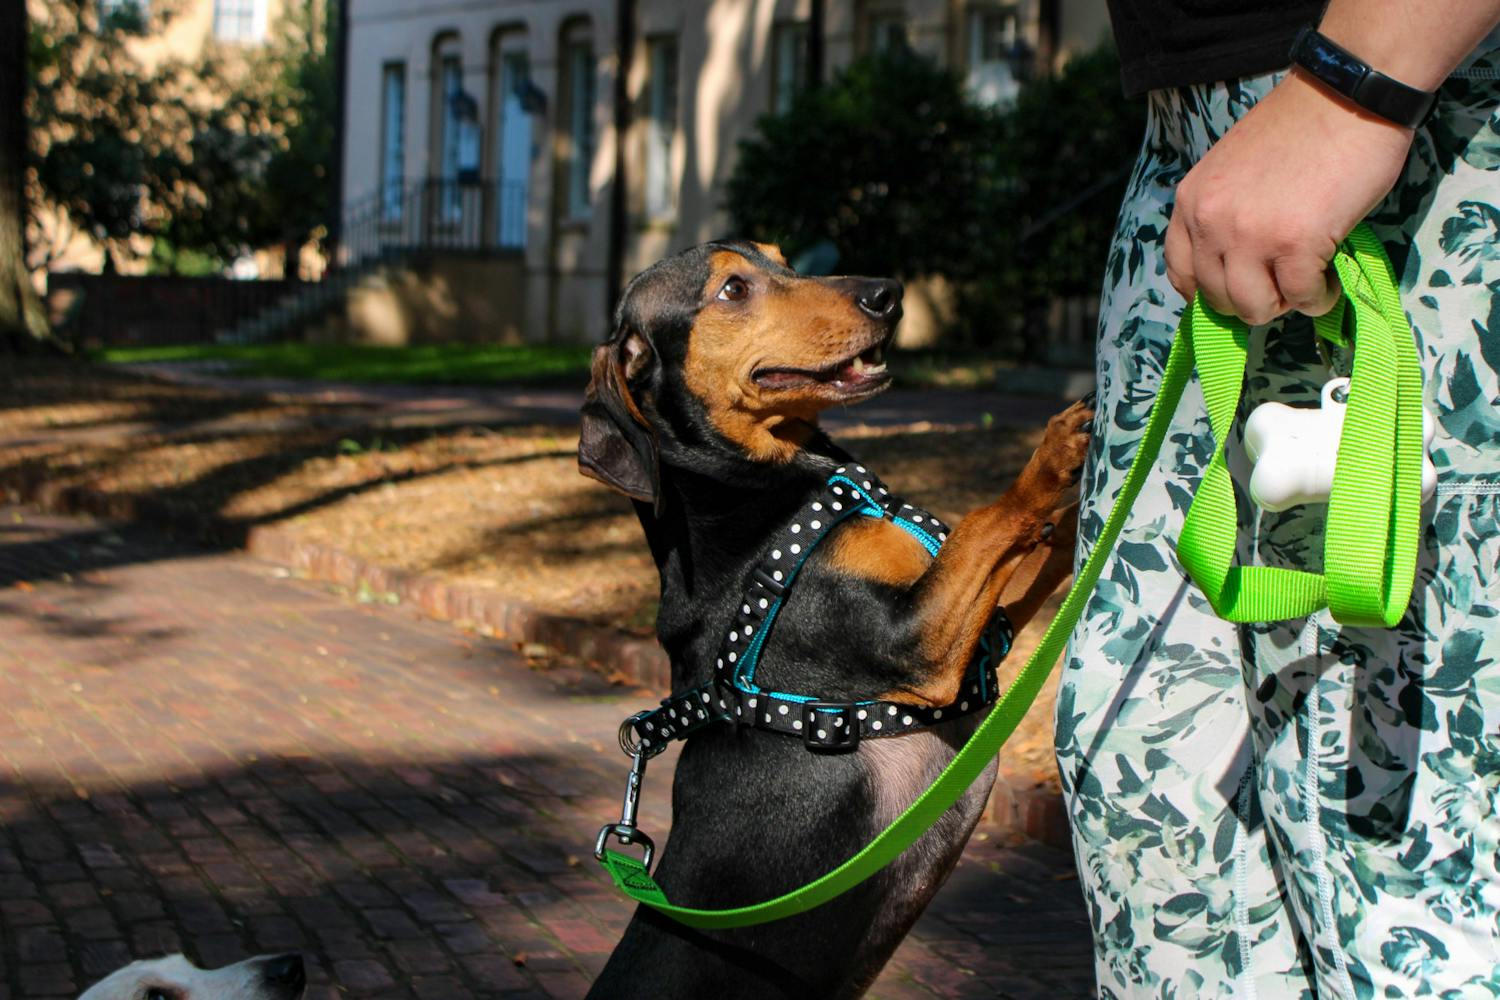 A black and brown dachshund greets its owner during a community dachshund walk held by Dachshunds of Columbia on Sept. 17, 2022. The Columbia dog-walking group gathered with their furry friends for a walk through 鶹С򽴫ý's Horseshoe on Saturday morning.